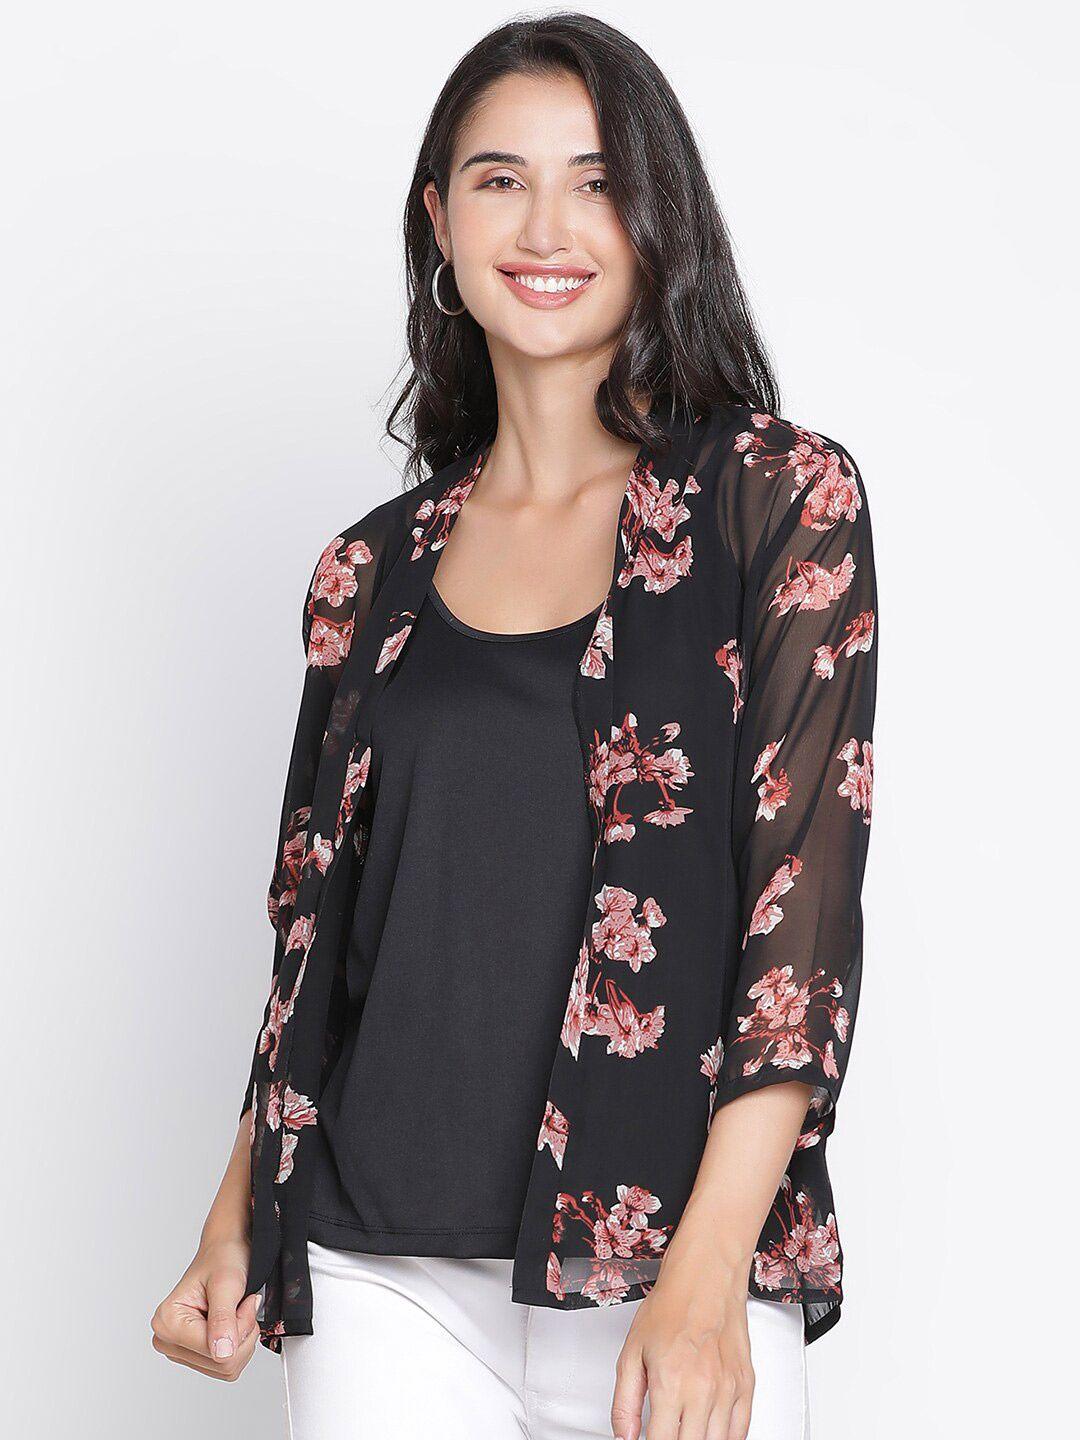 draax fashions floral printed open front shrug